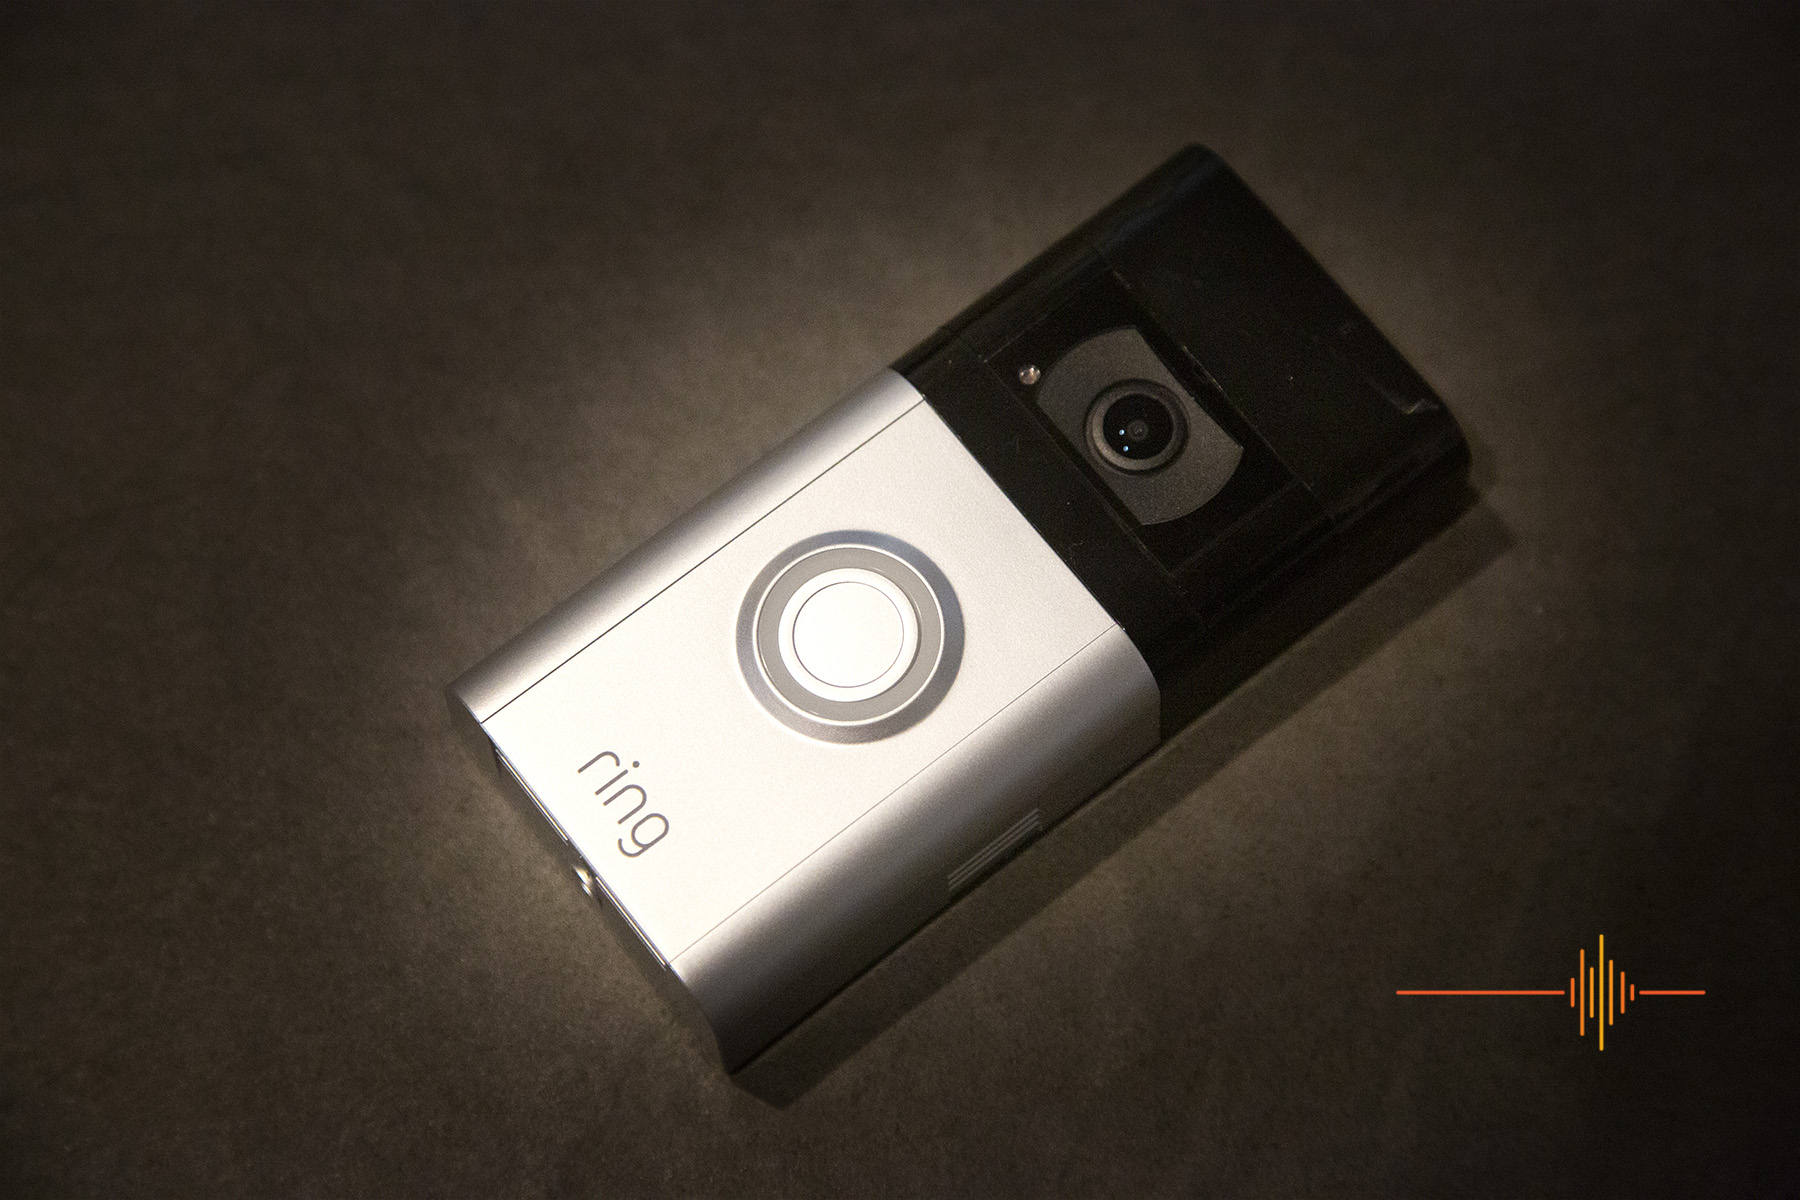 Ring's second-gen Video Doorbell brings better video quality for